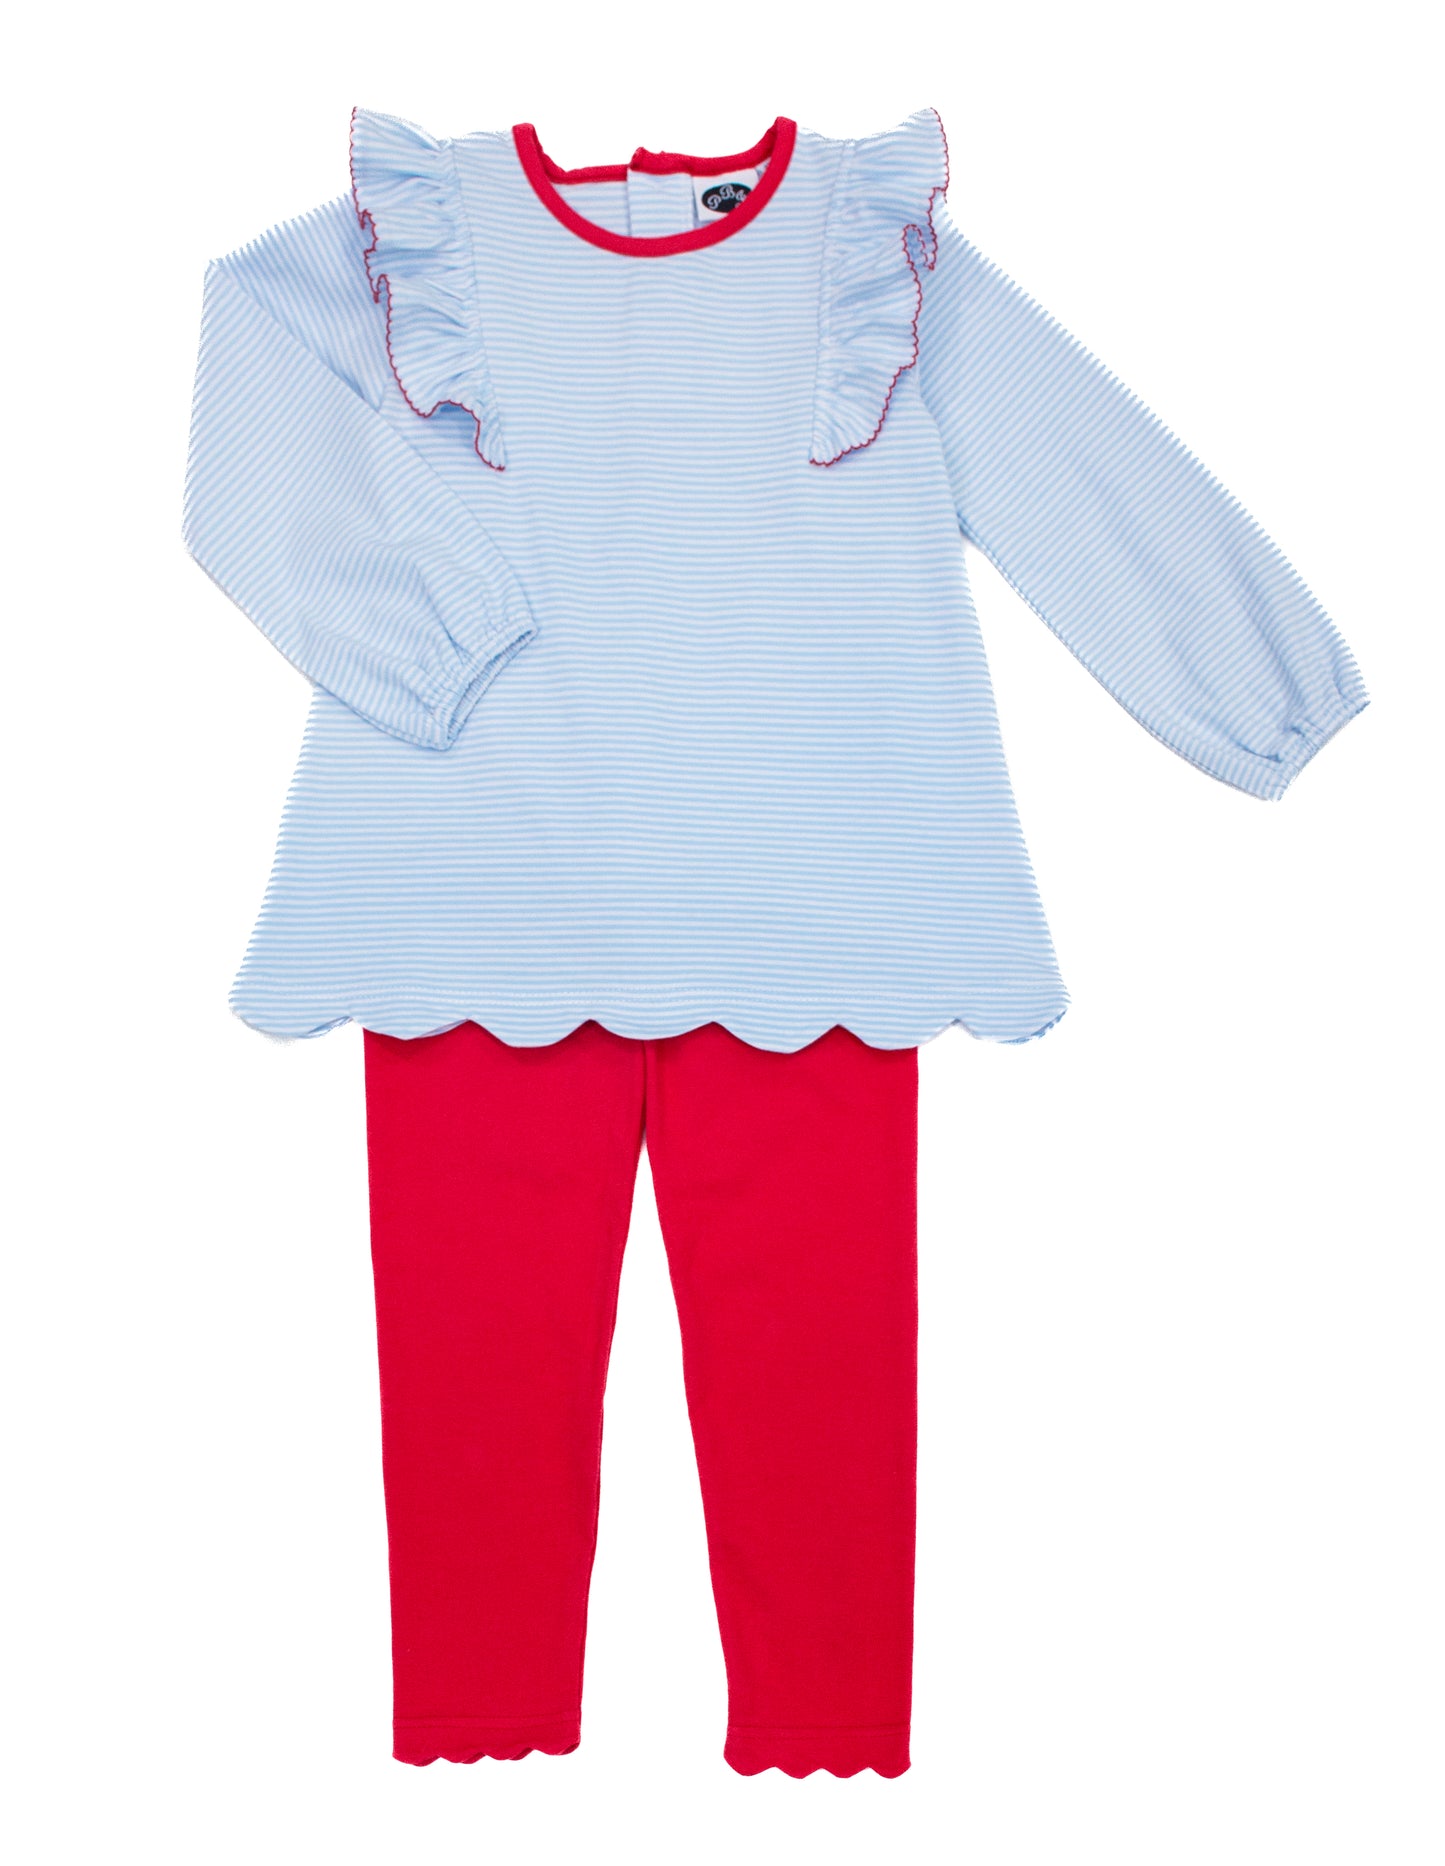 Evie scalloped tunic Blue stripes/ red - PREORDER*